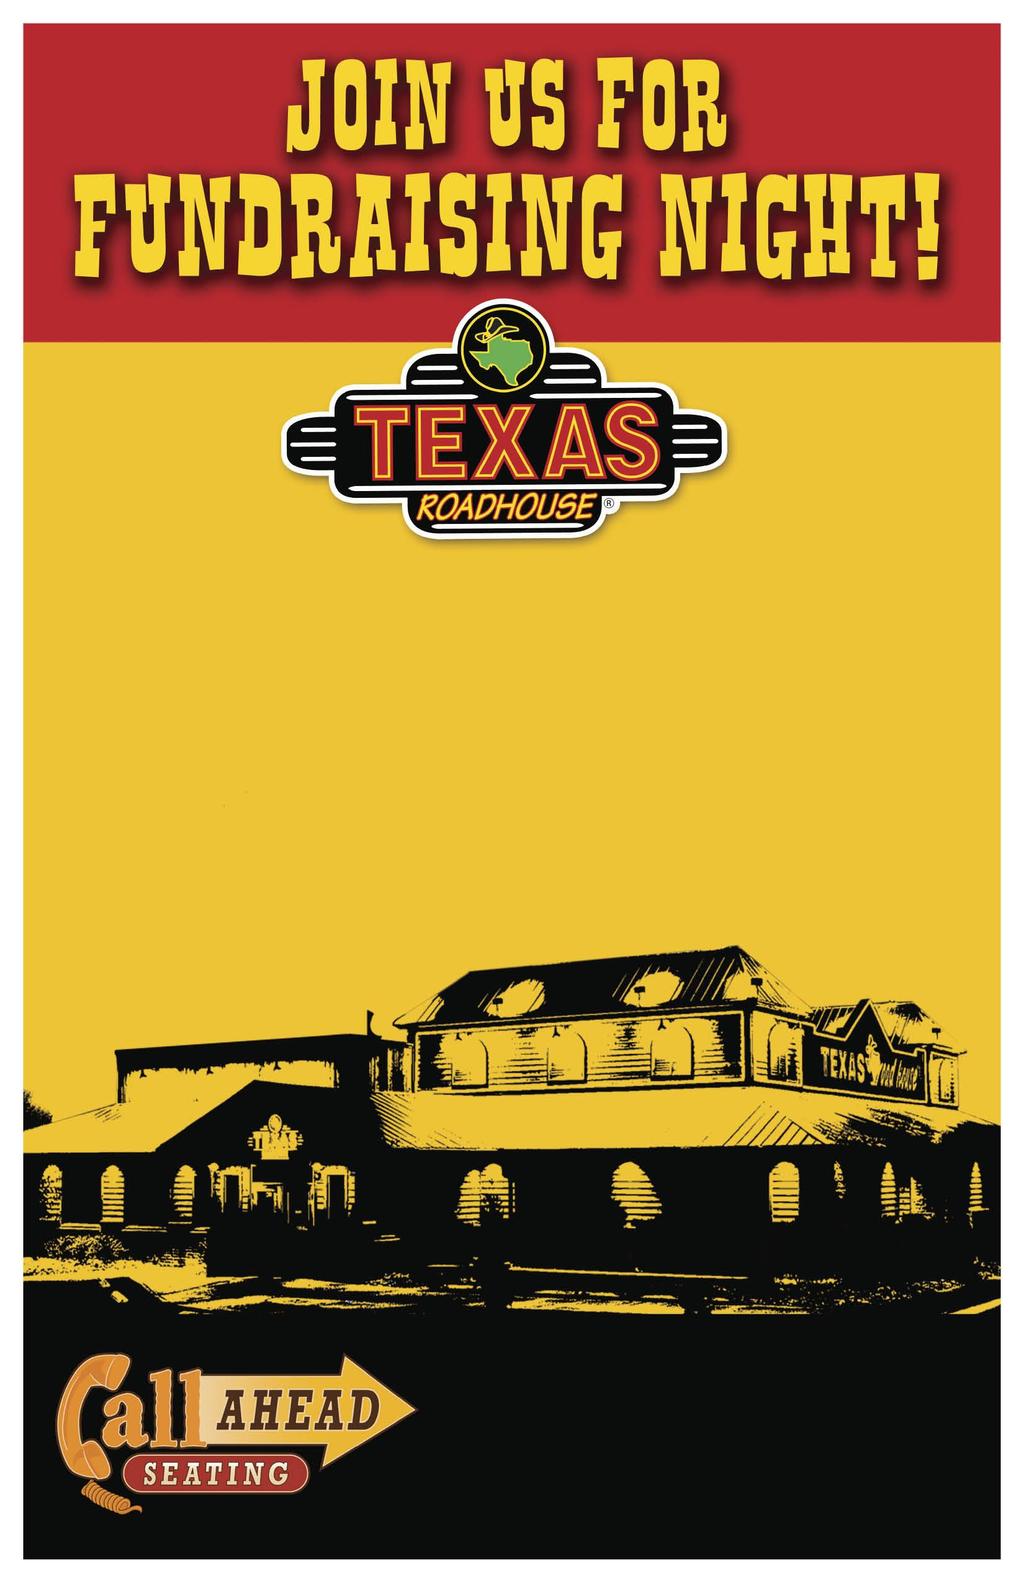 Faith United Methodist Church Sunday, April 29th 11AM-4PM Support this cause by presenting this invitation to the listed Texas Roadhouse location and Texas Roadhouse will donate 10% of your total